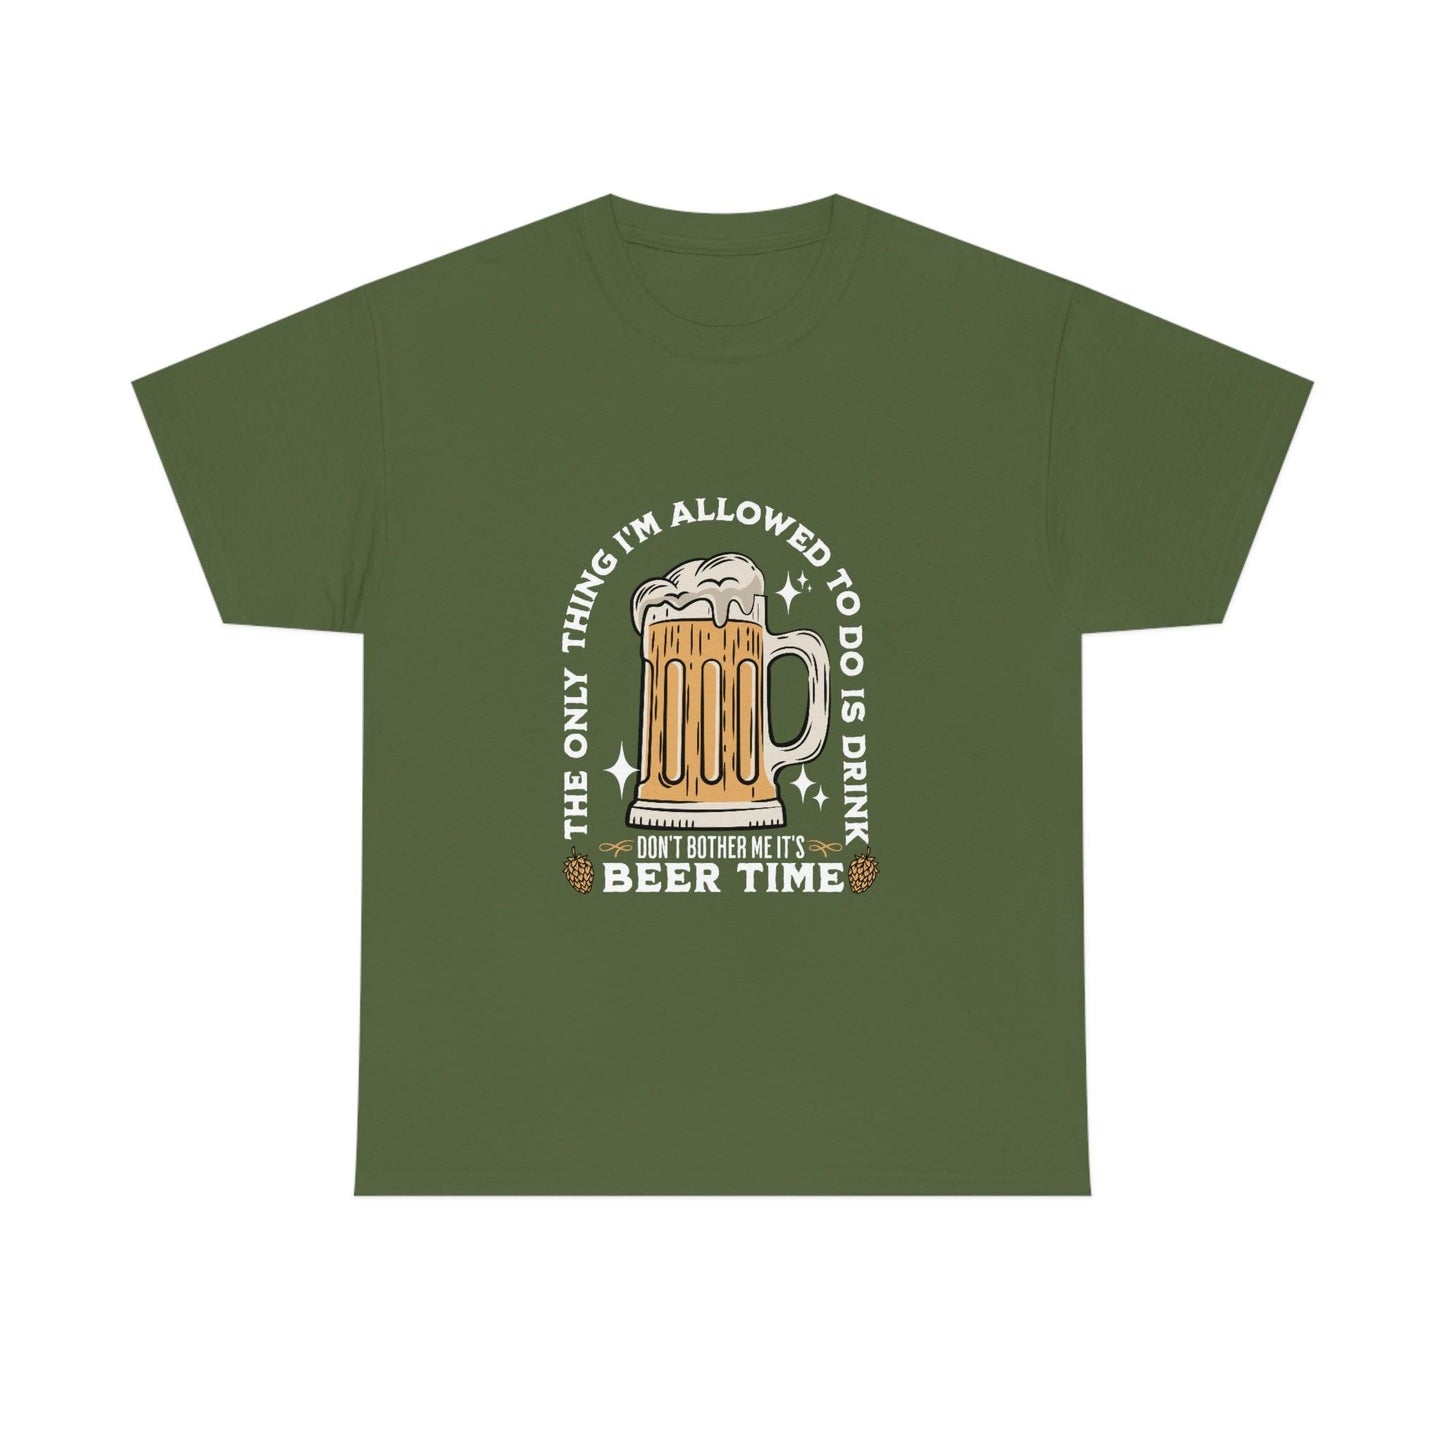 The only thing I am allowed to do is Drink - Beer Time Cotton Tee